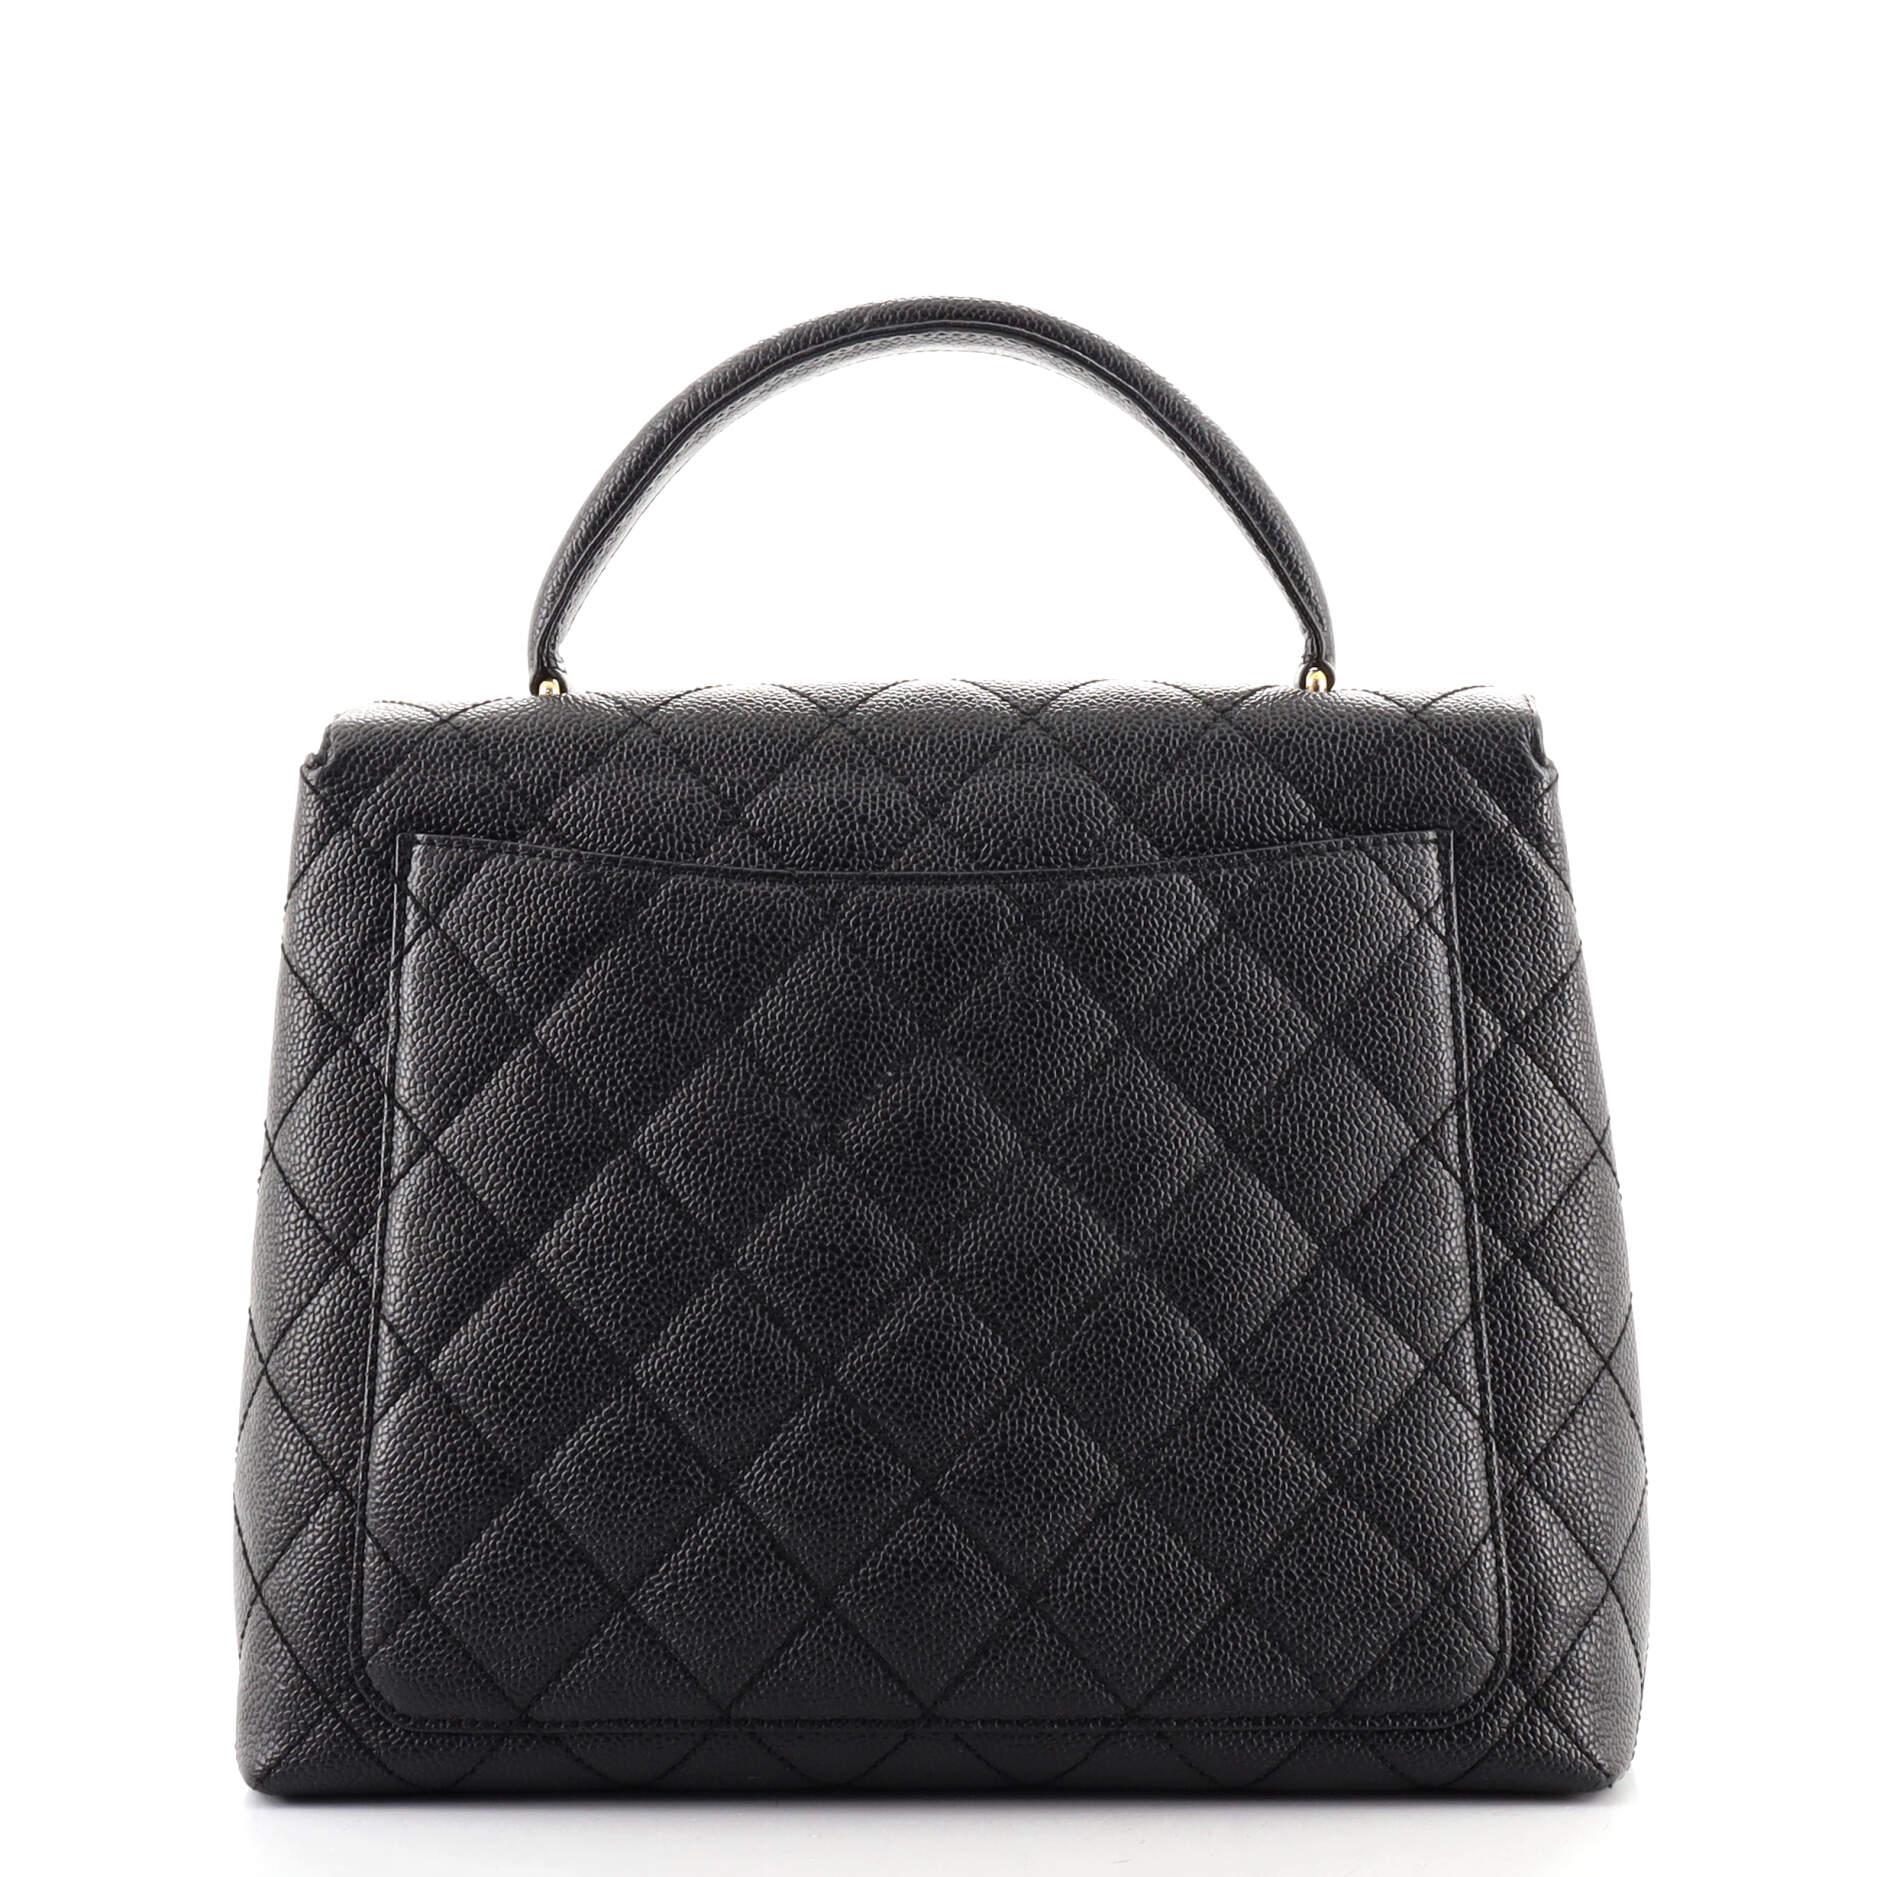 Black Chanel Vintage Classic Top Handle Flap Bag Quilted Caviar Jumbo